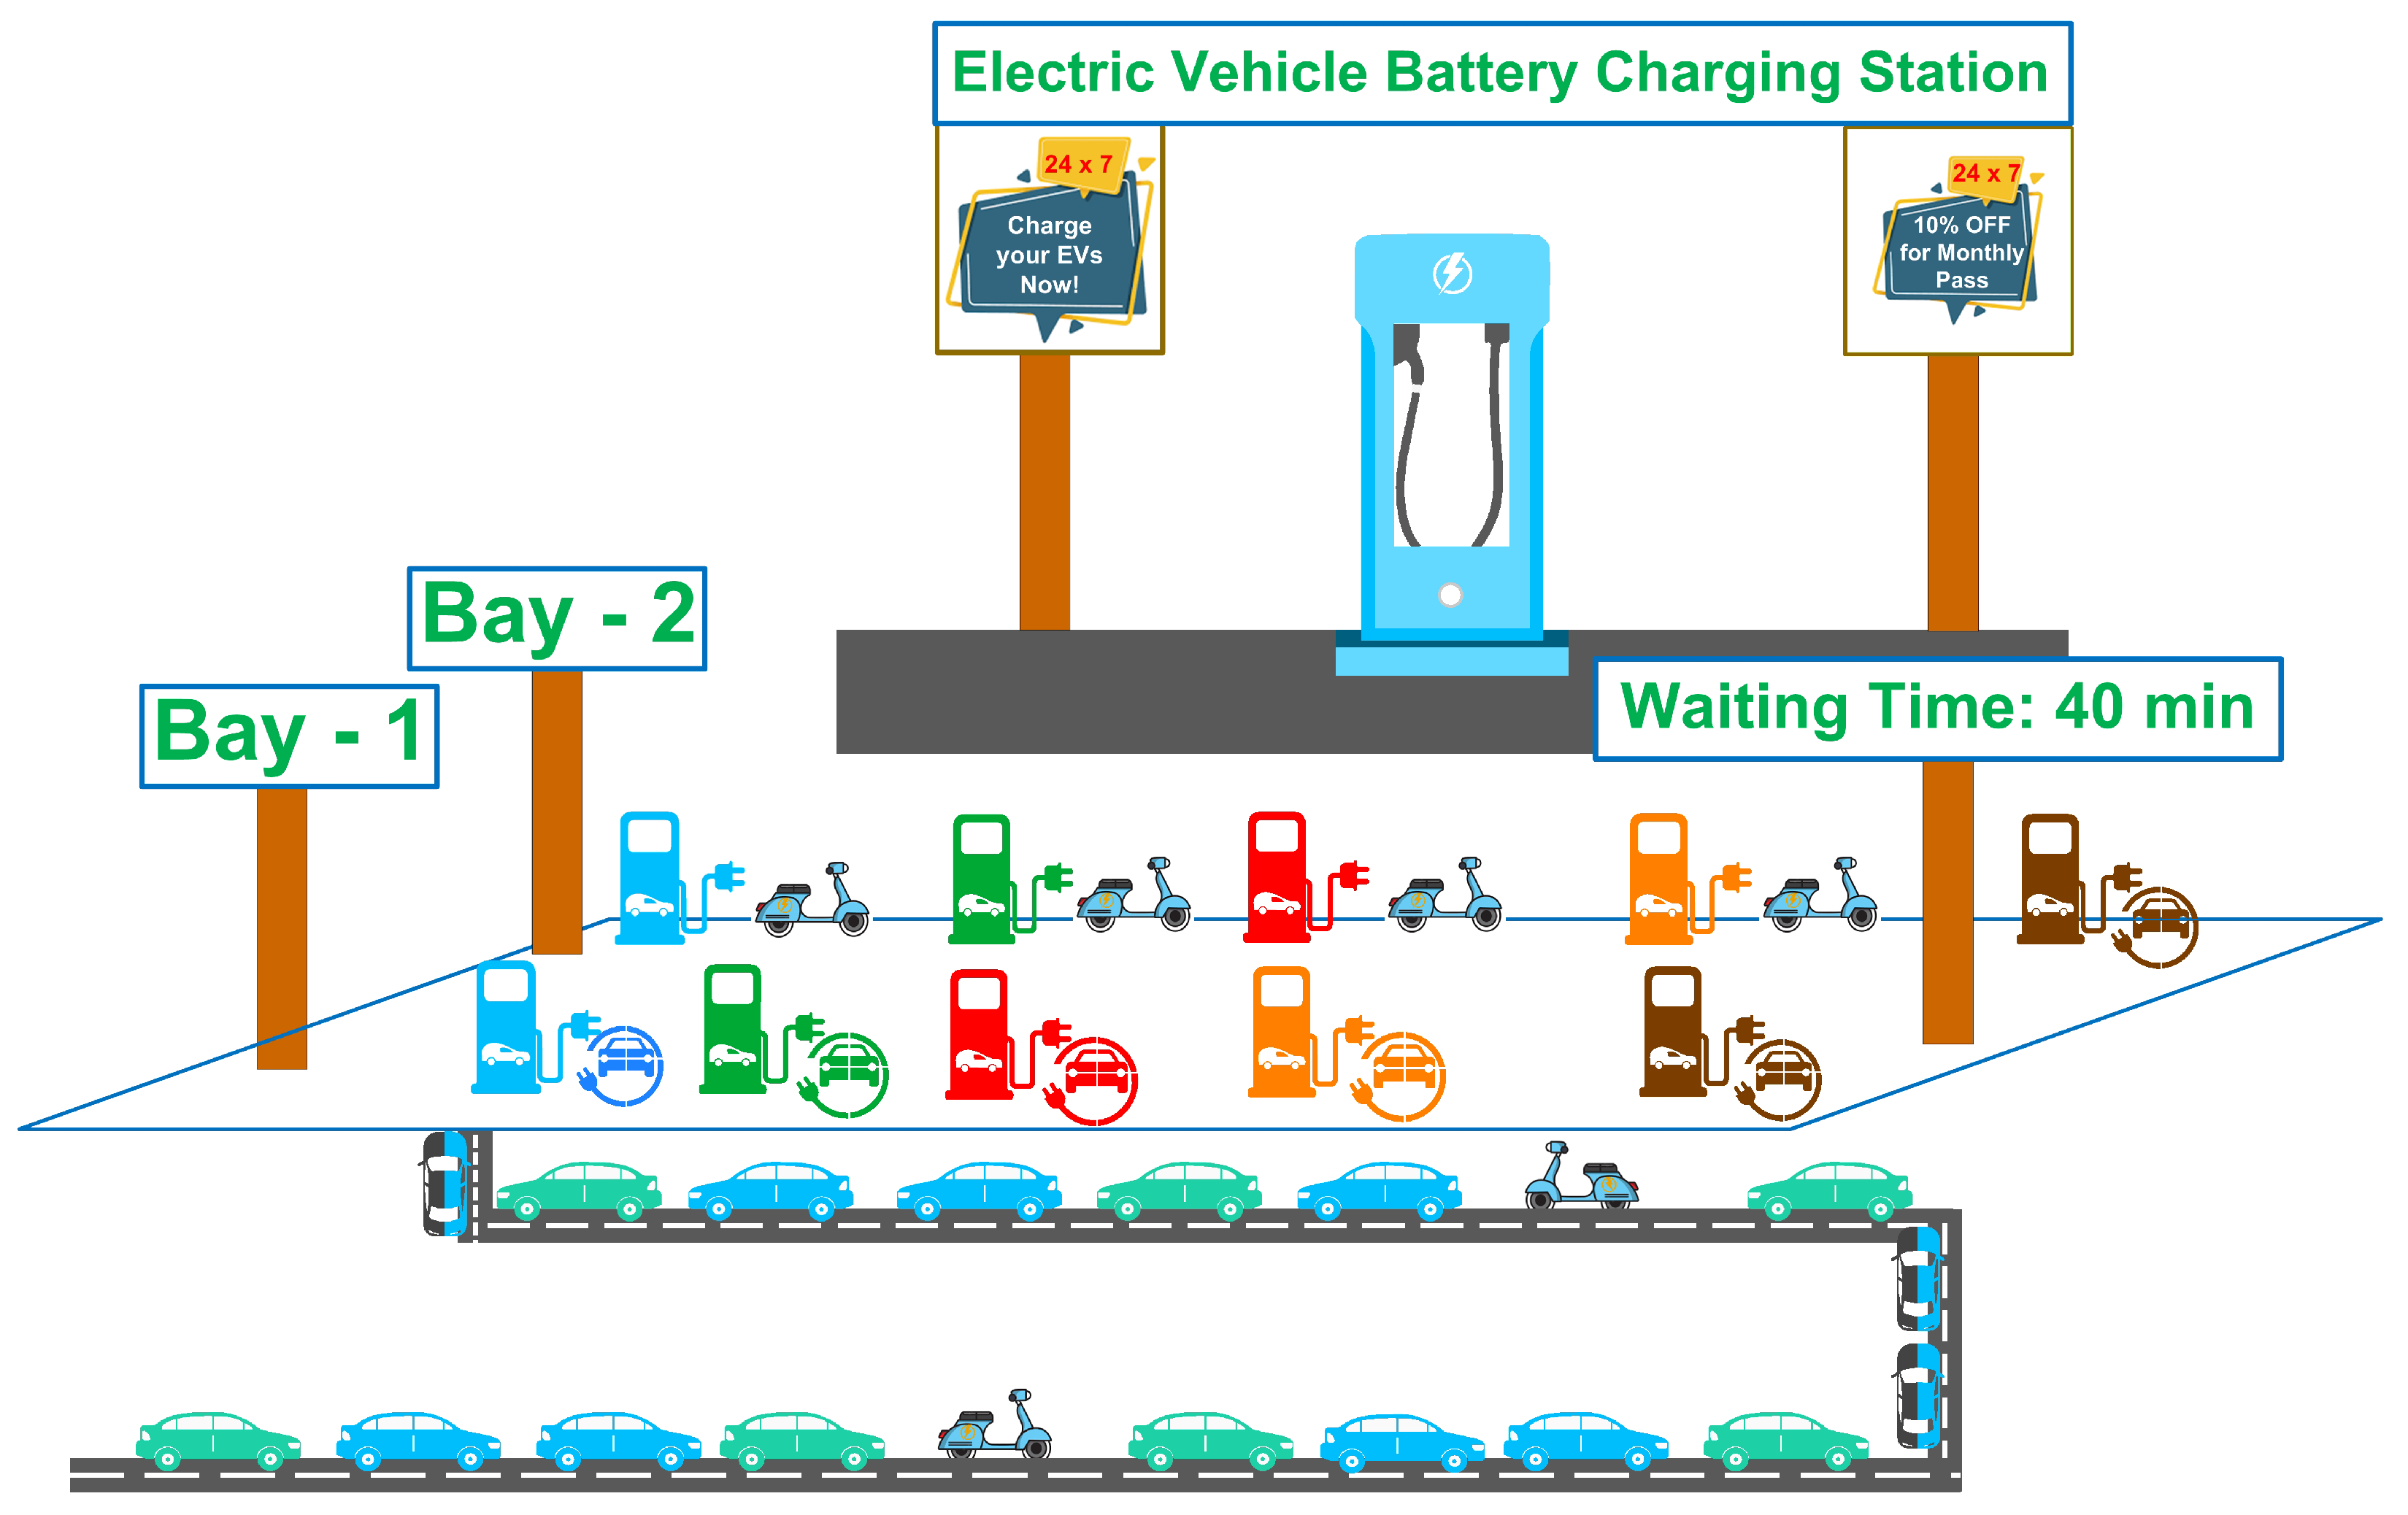 The Comprehensive Guide to Level 2 EV Charging - EVESCO